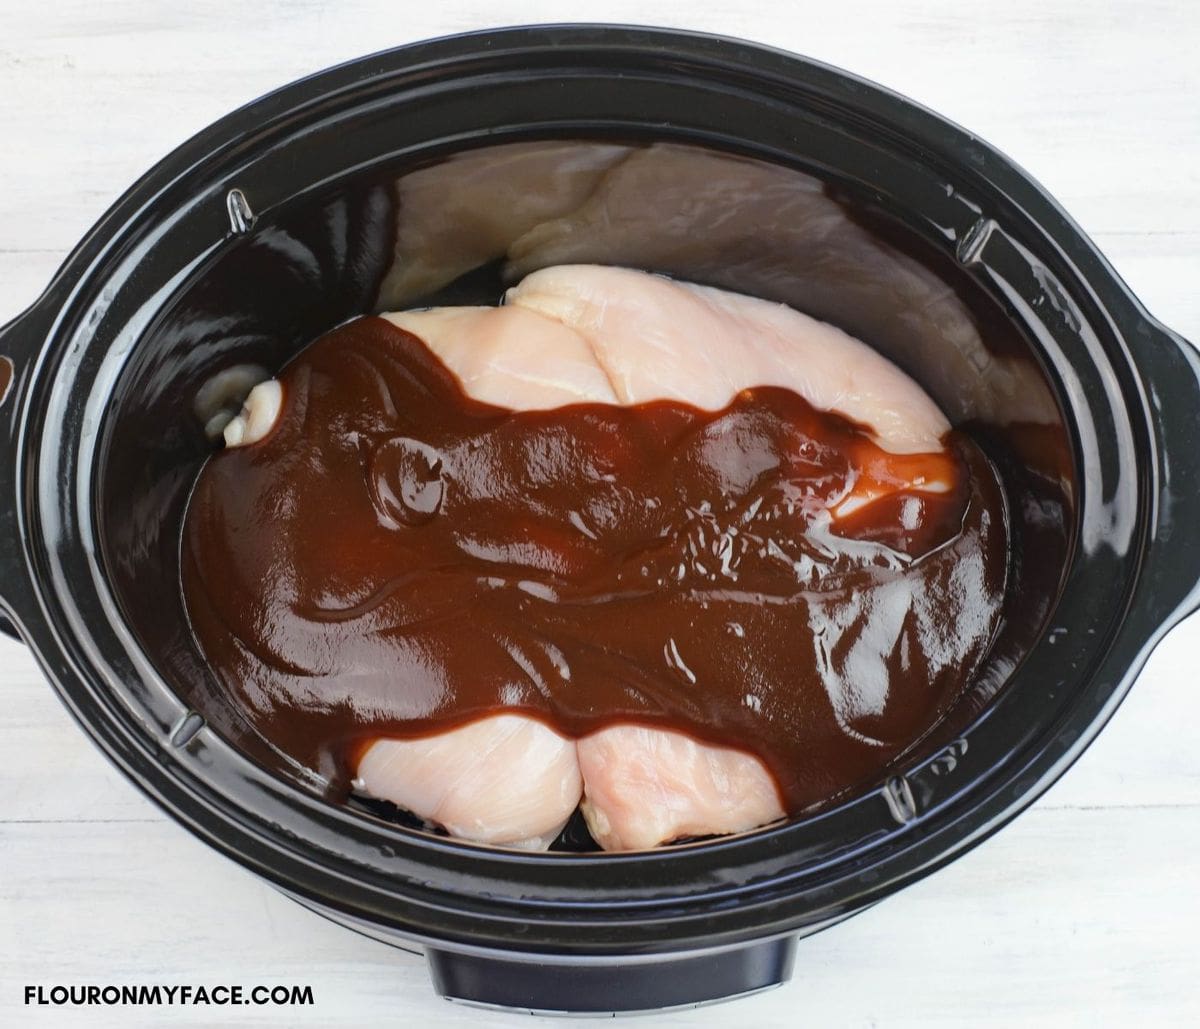 Chicken with barbecue sauce inside a slow cooker.